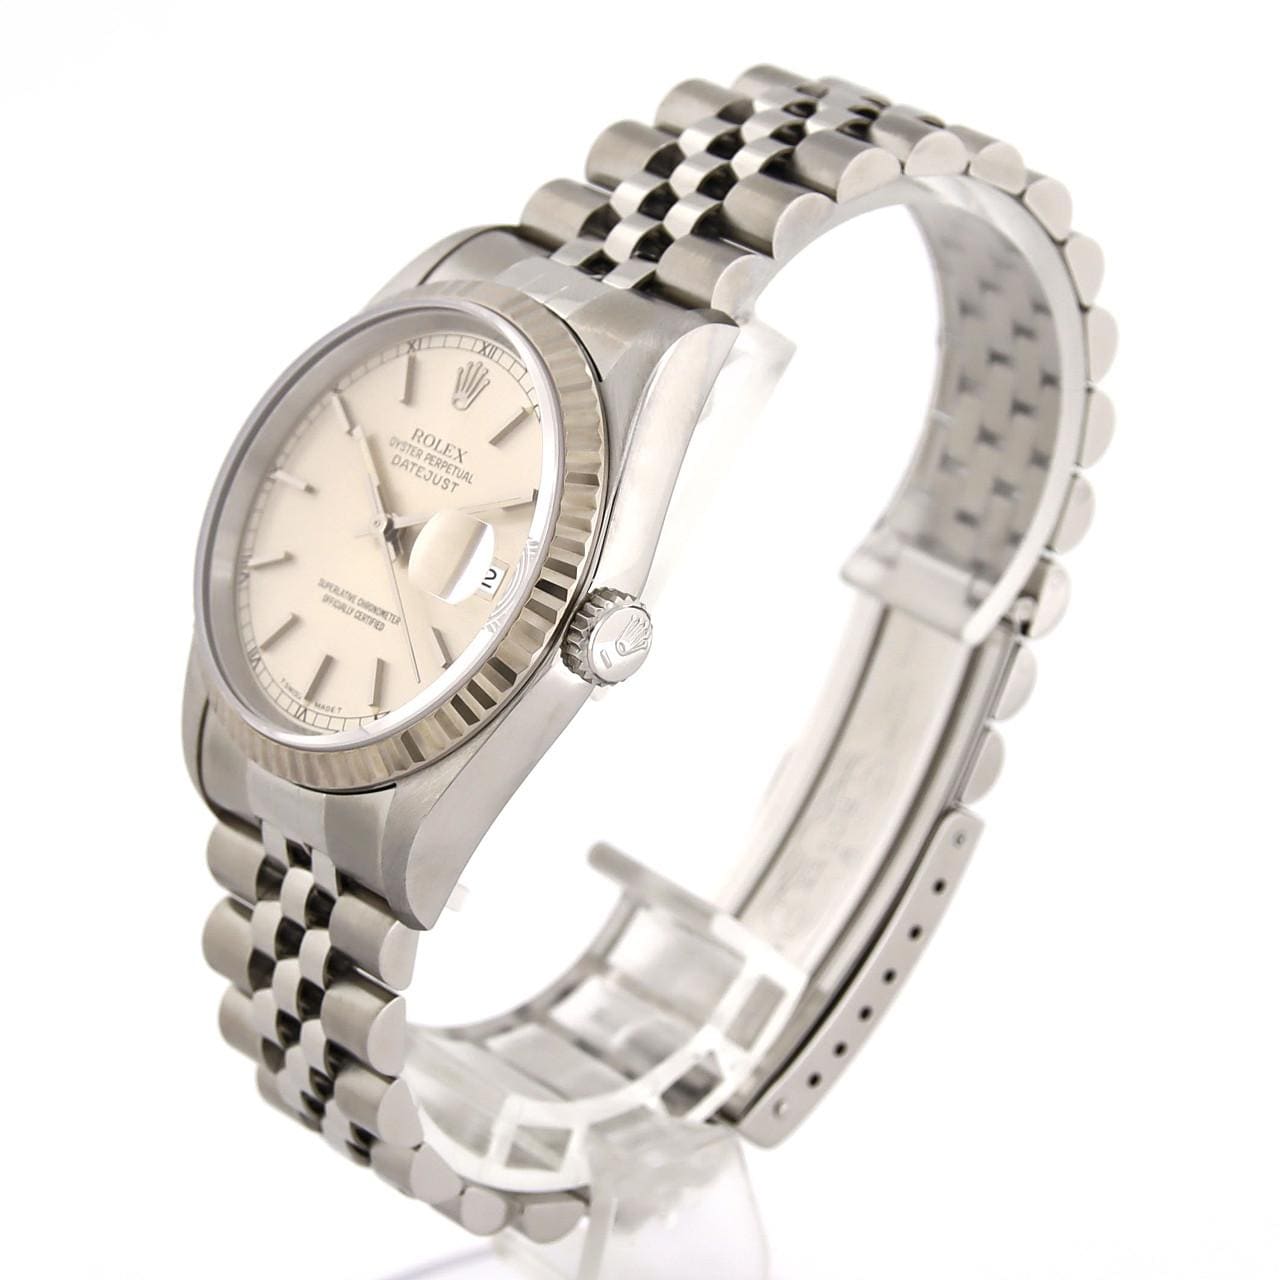 ROLEX Datejust 16234 SSxWG Automatic W number